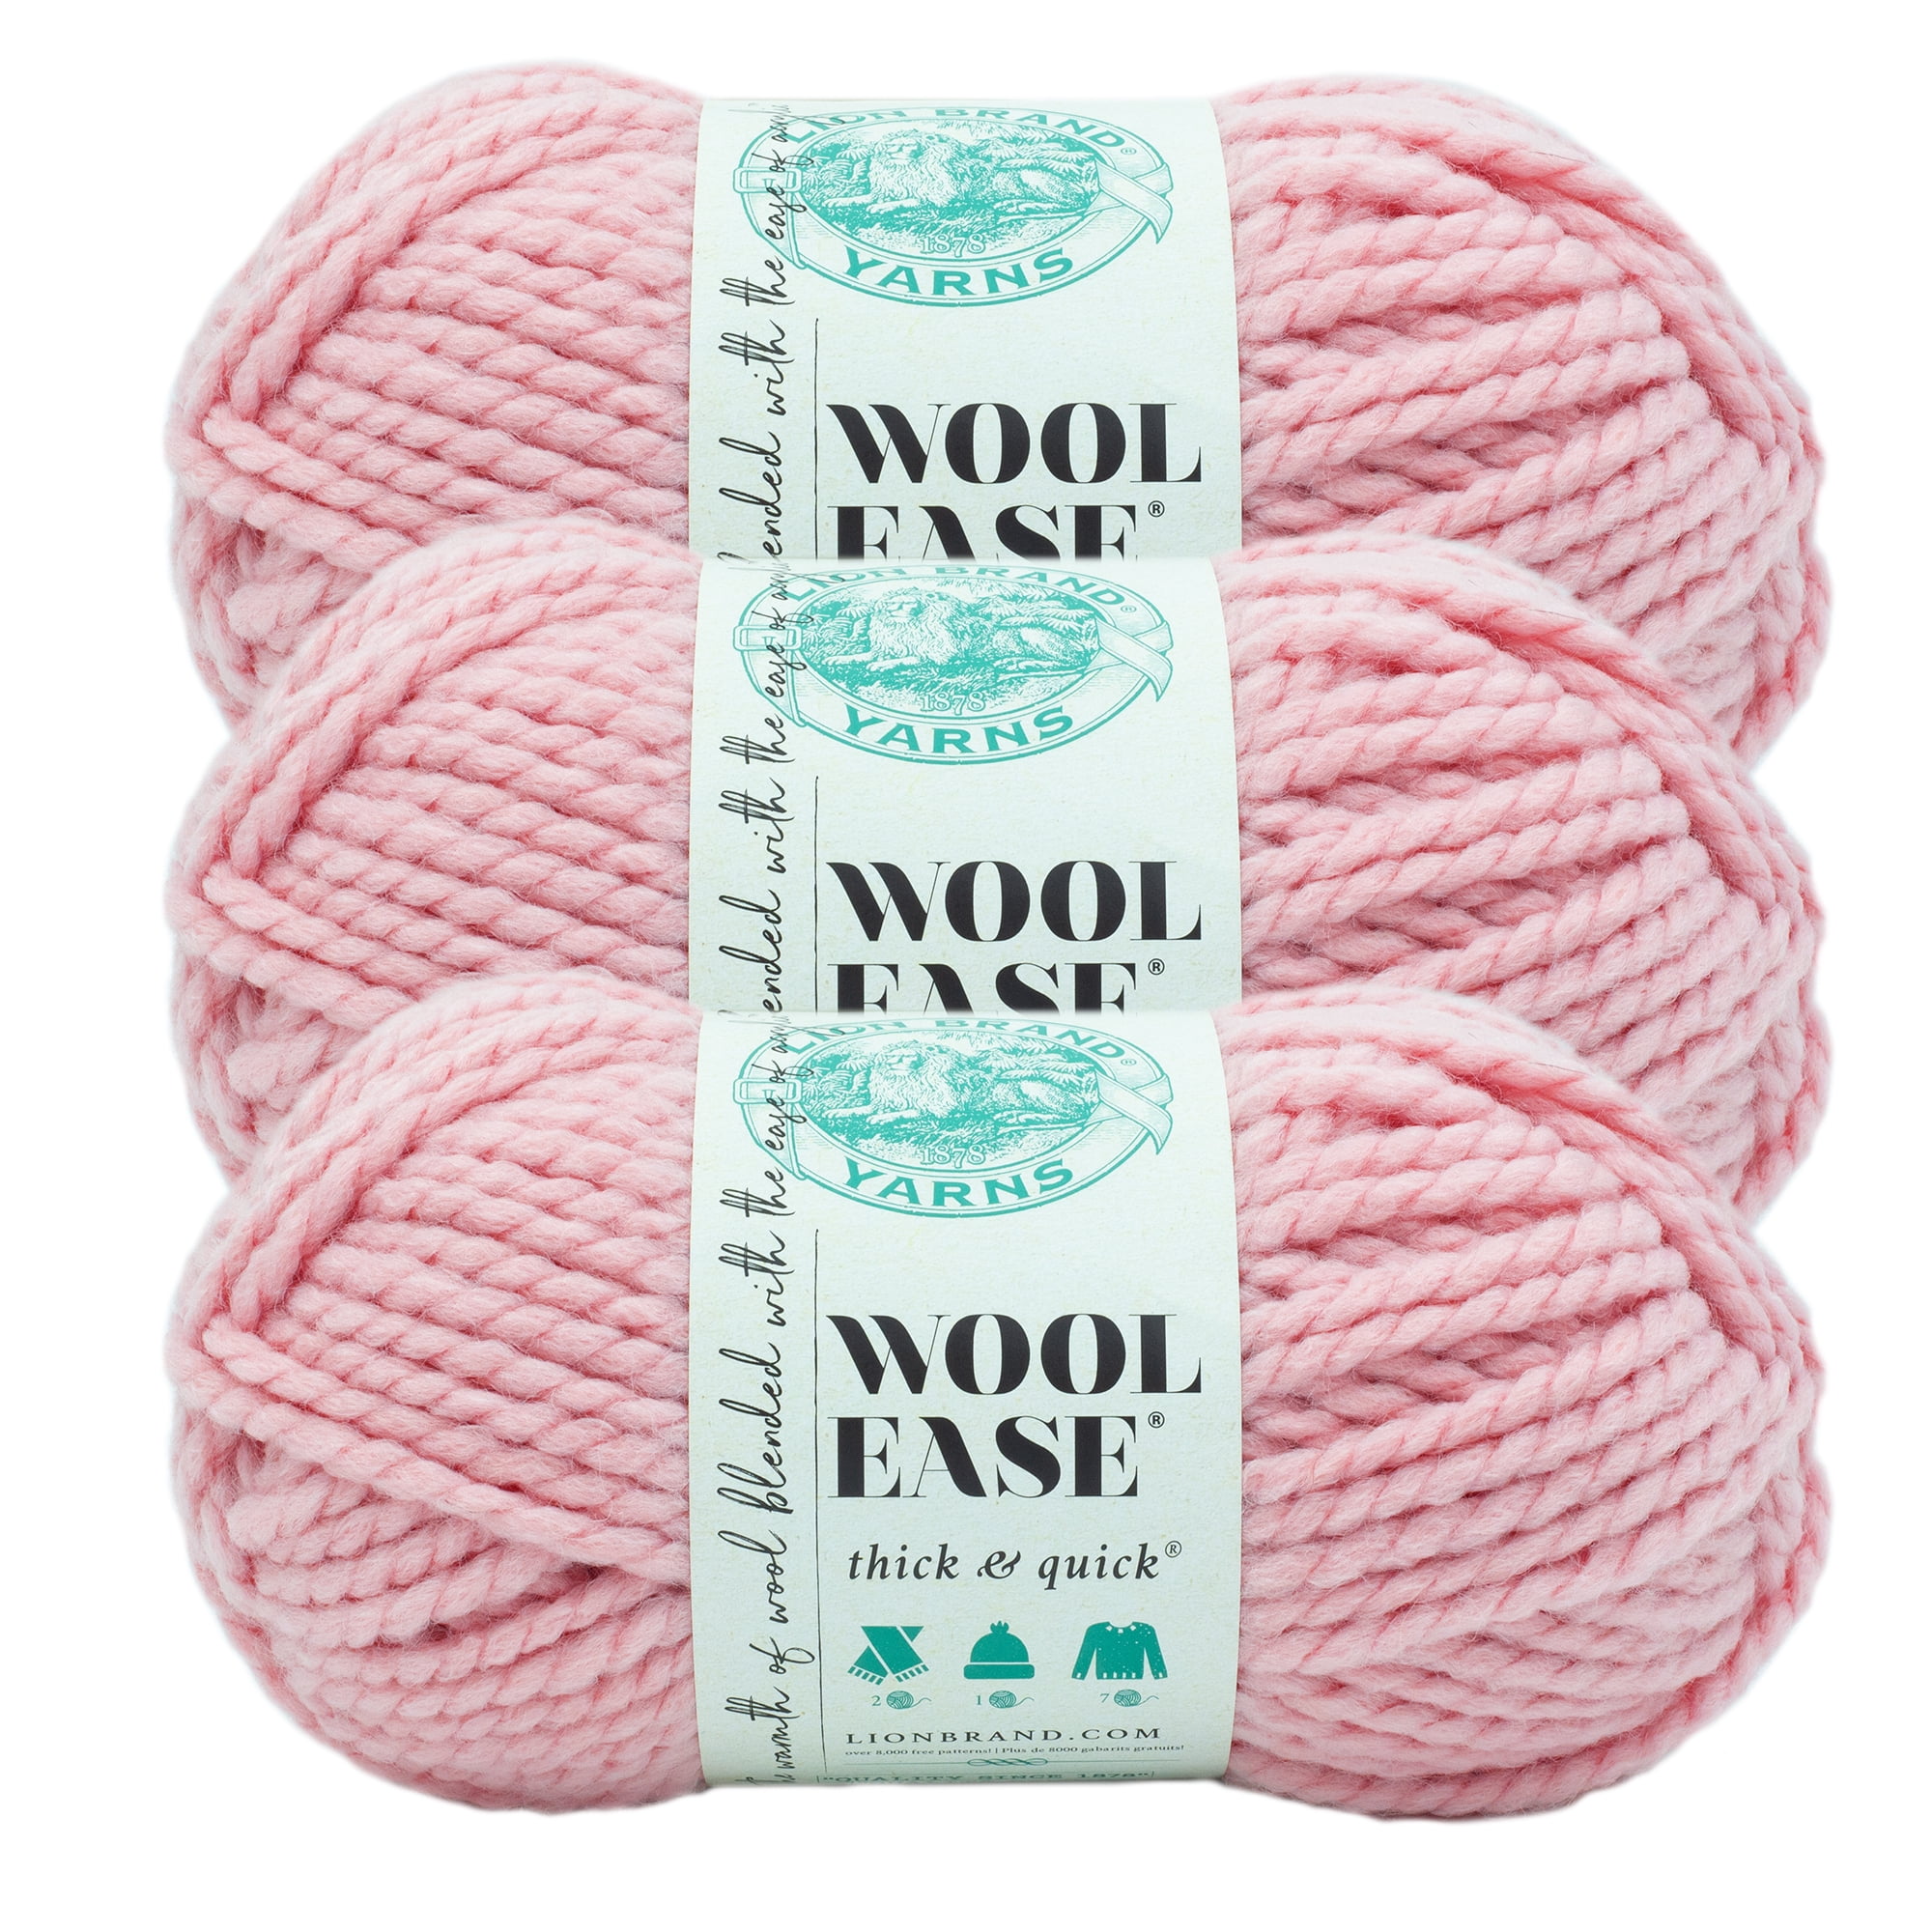 Lion Brand Yarn Wool-Ease Thick and Quick Dreamcatcher Classic Super Bulky  Acrylic, Wool Multi-color Multi-Color Yarn 3 Pack